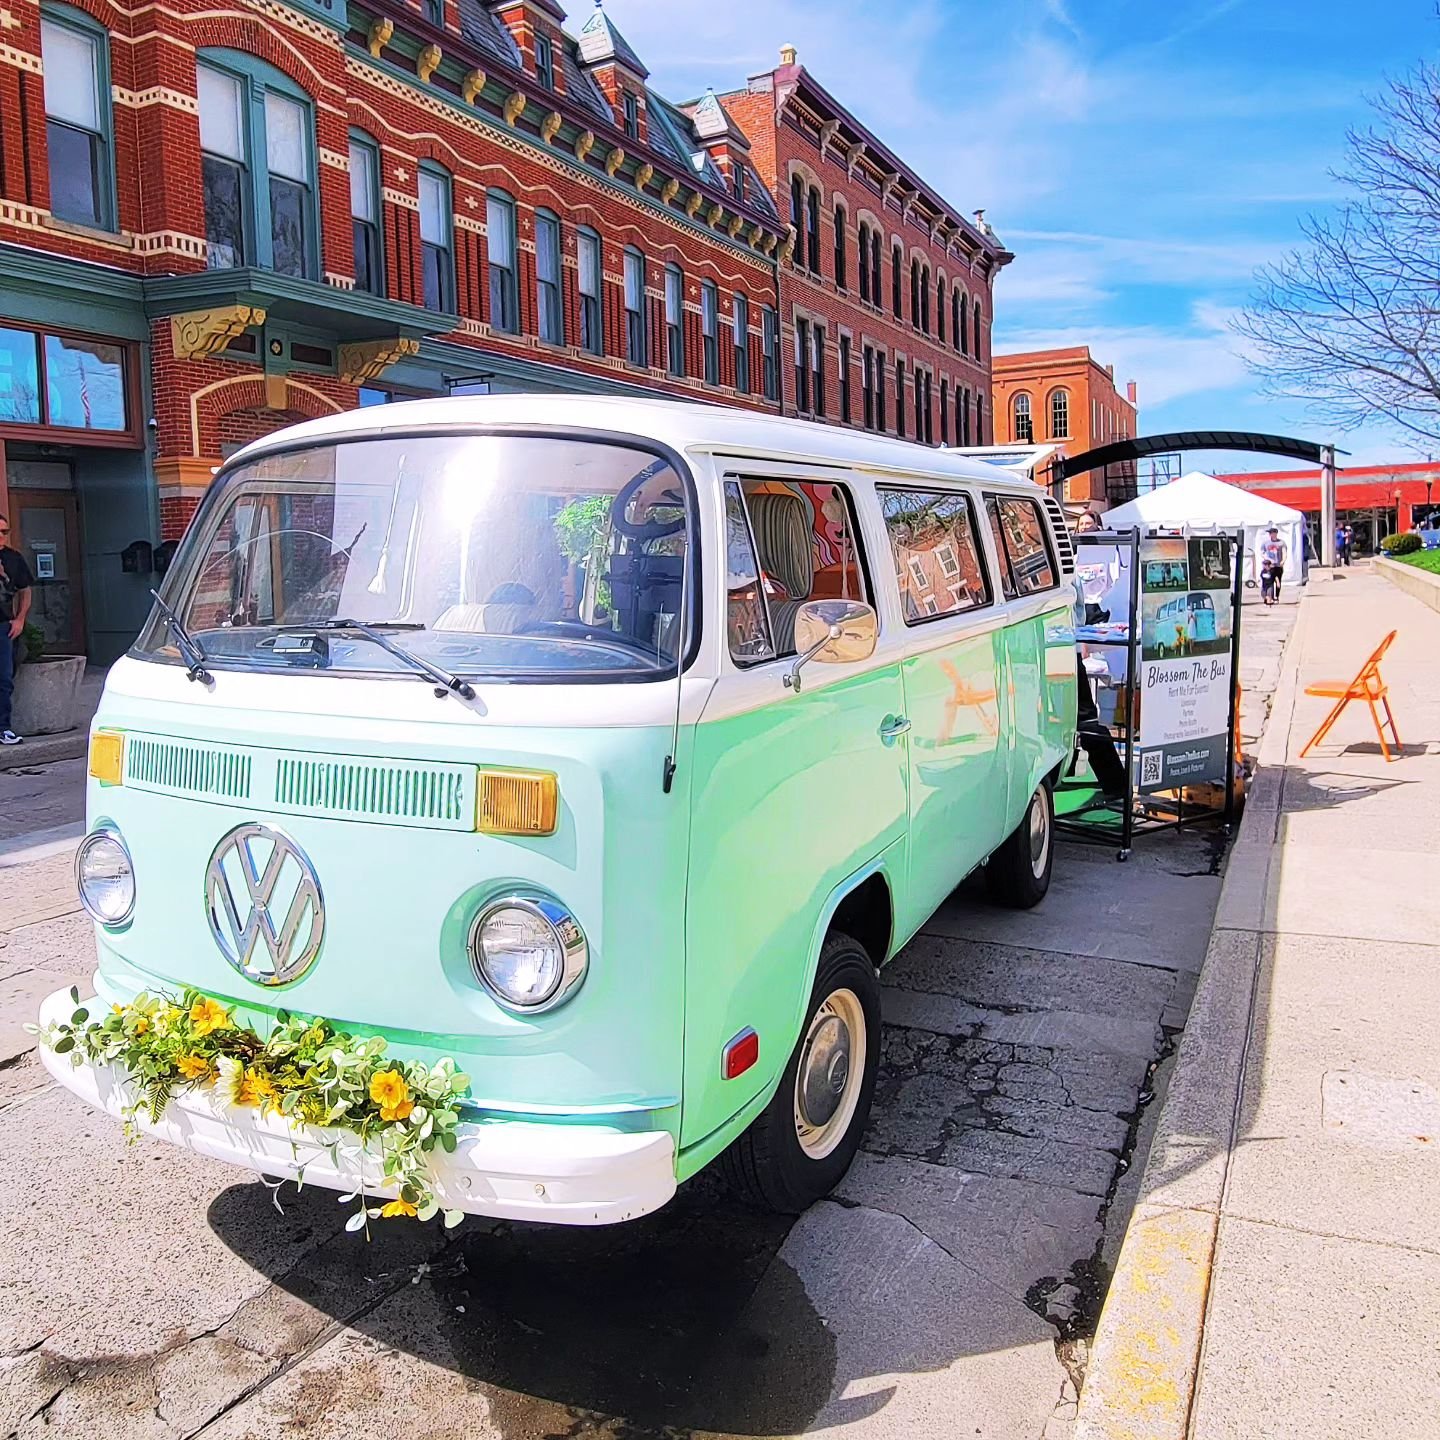 We will be downtown for 1 more hour, stop by and see us until 1! 

Sold out of hoodies but we do have an online store now! (Look at us 😆) https://blossomthebus.myshopify.com/